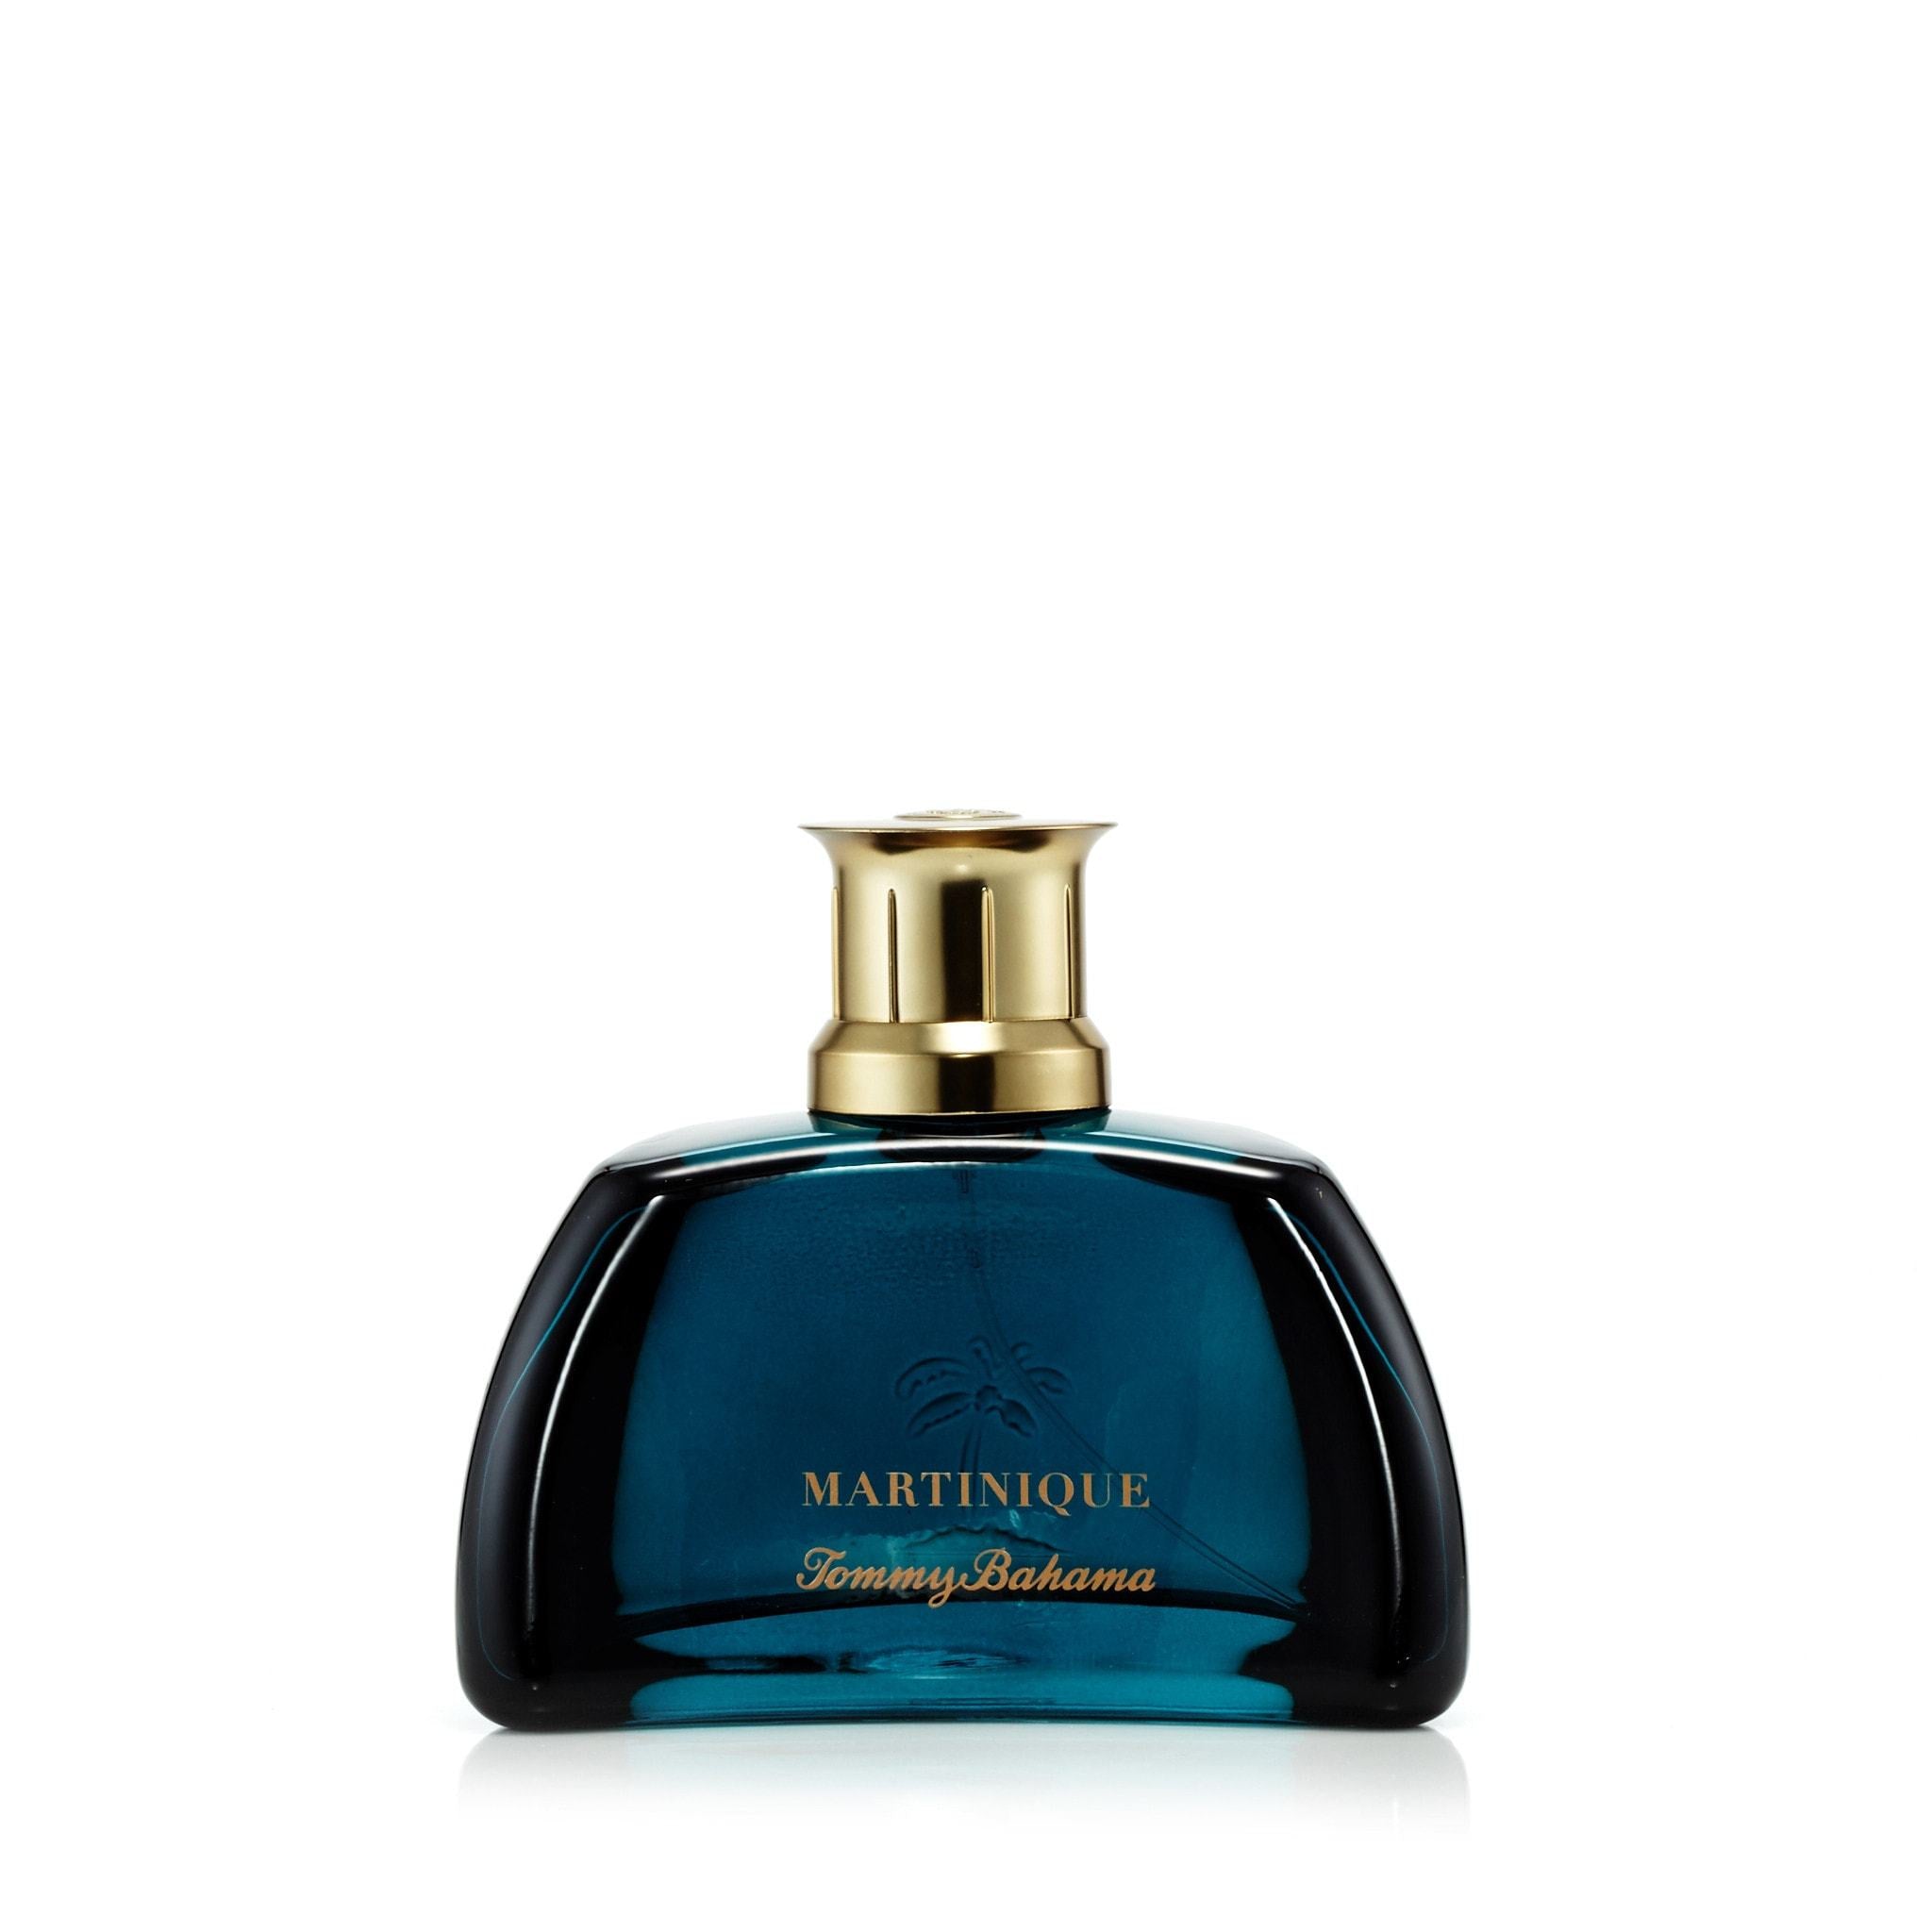 martinique tommy bahama perfume price